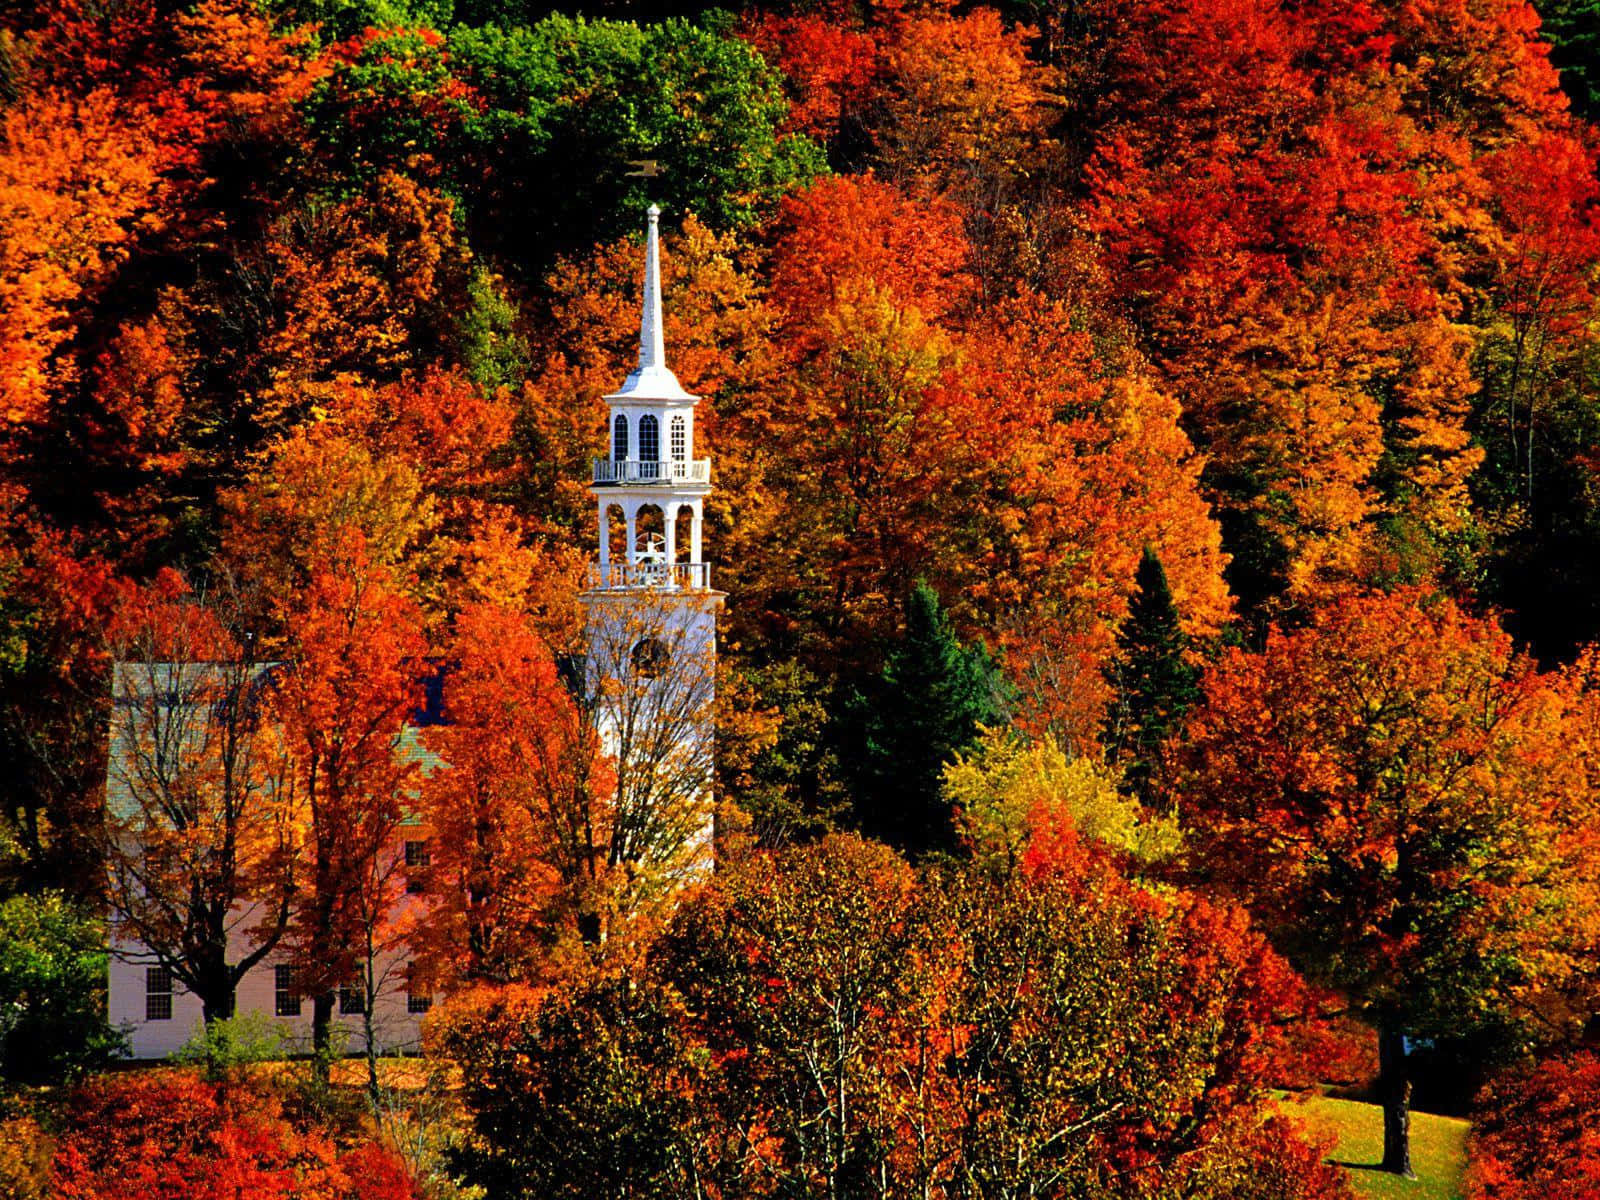 A picturesque Fall Town scene with colorful autumn leaves and charming architecture Wallpaper